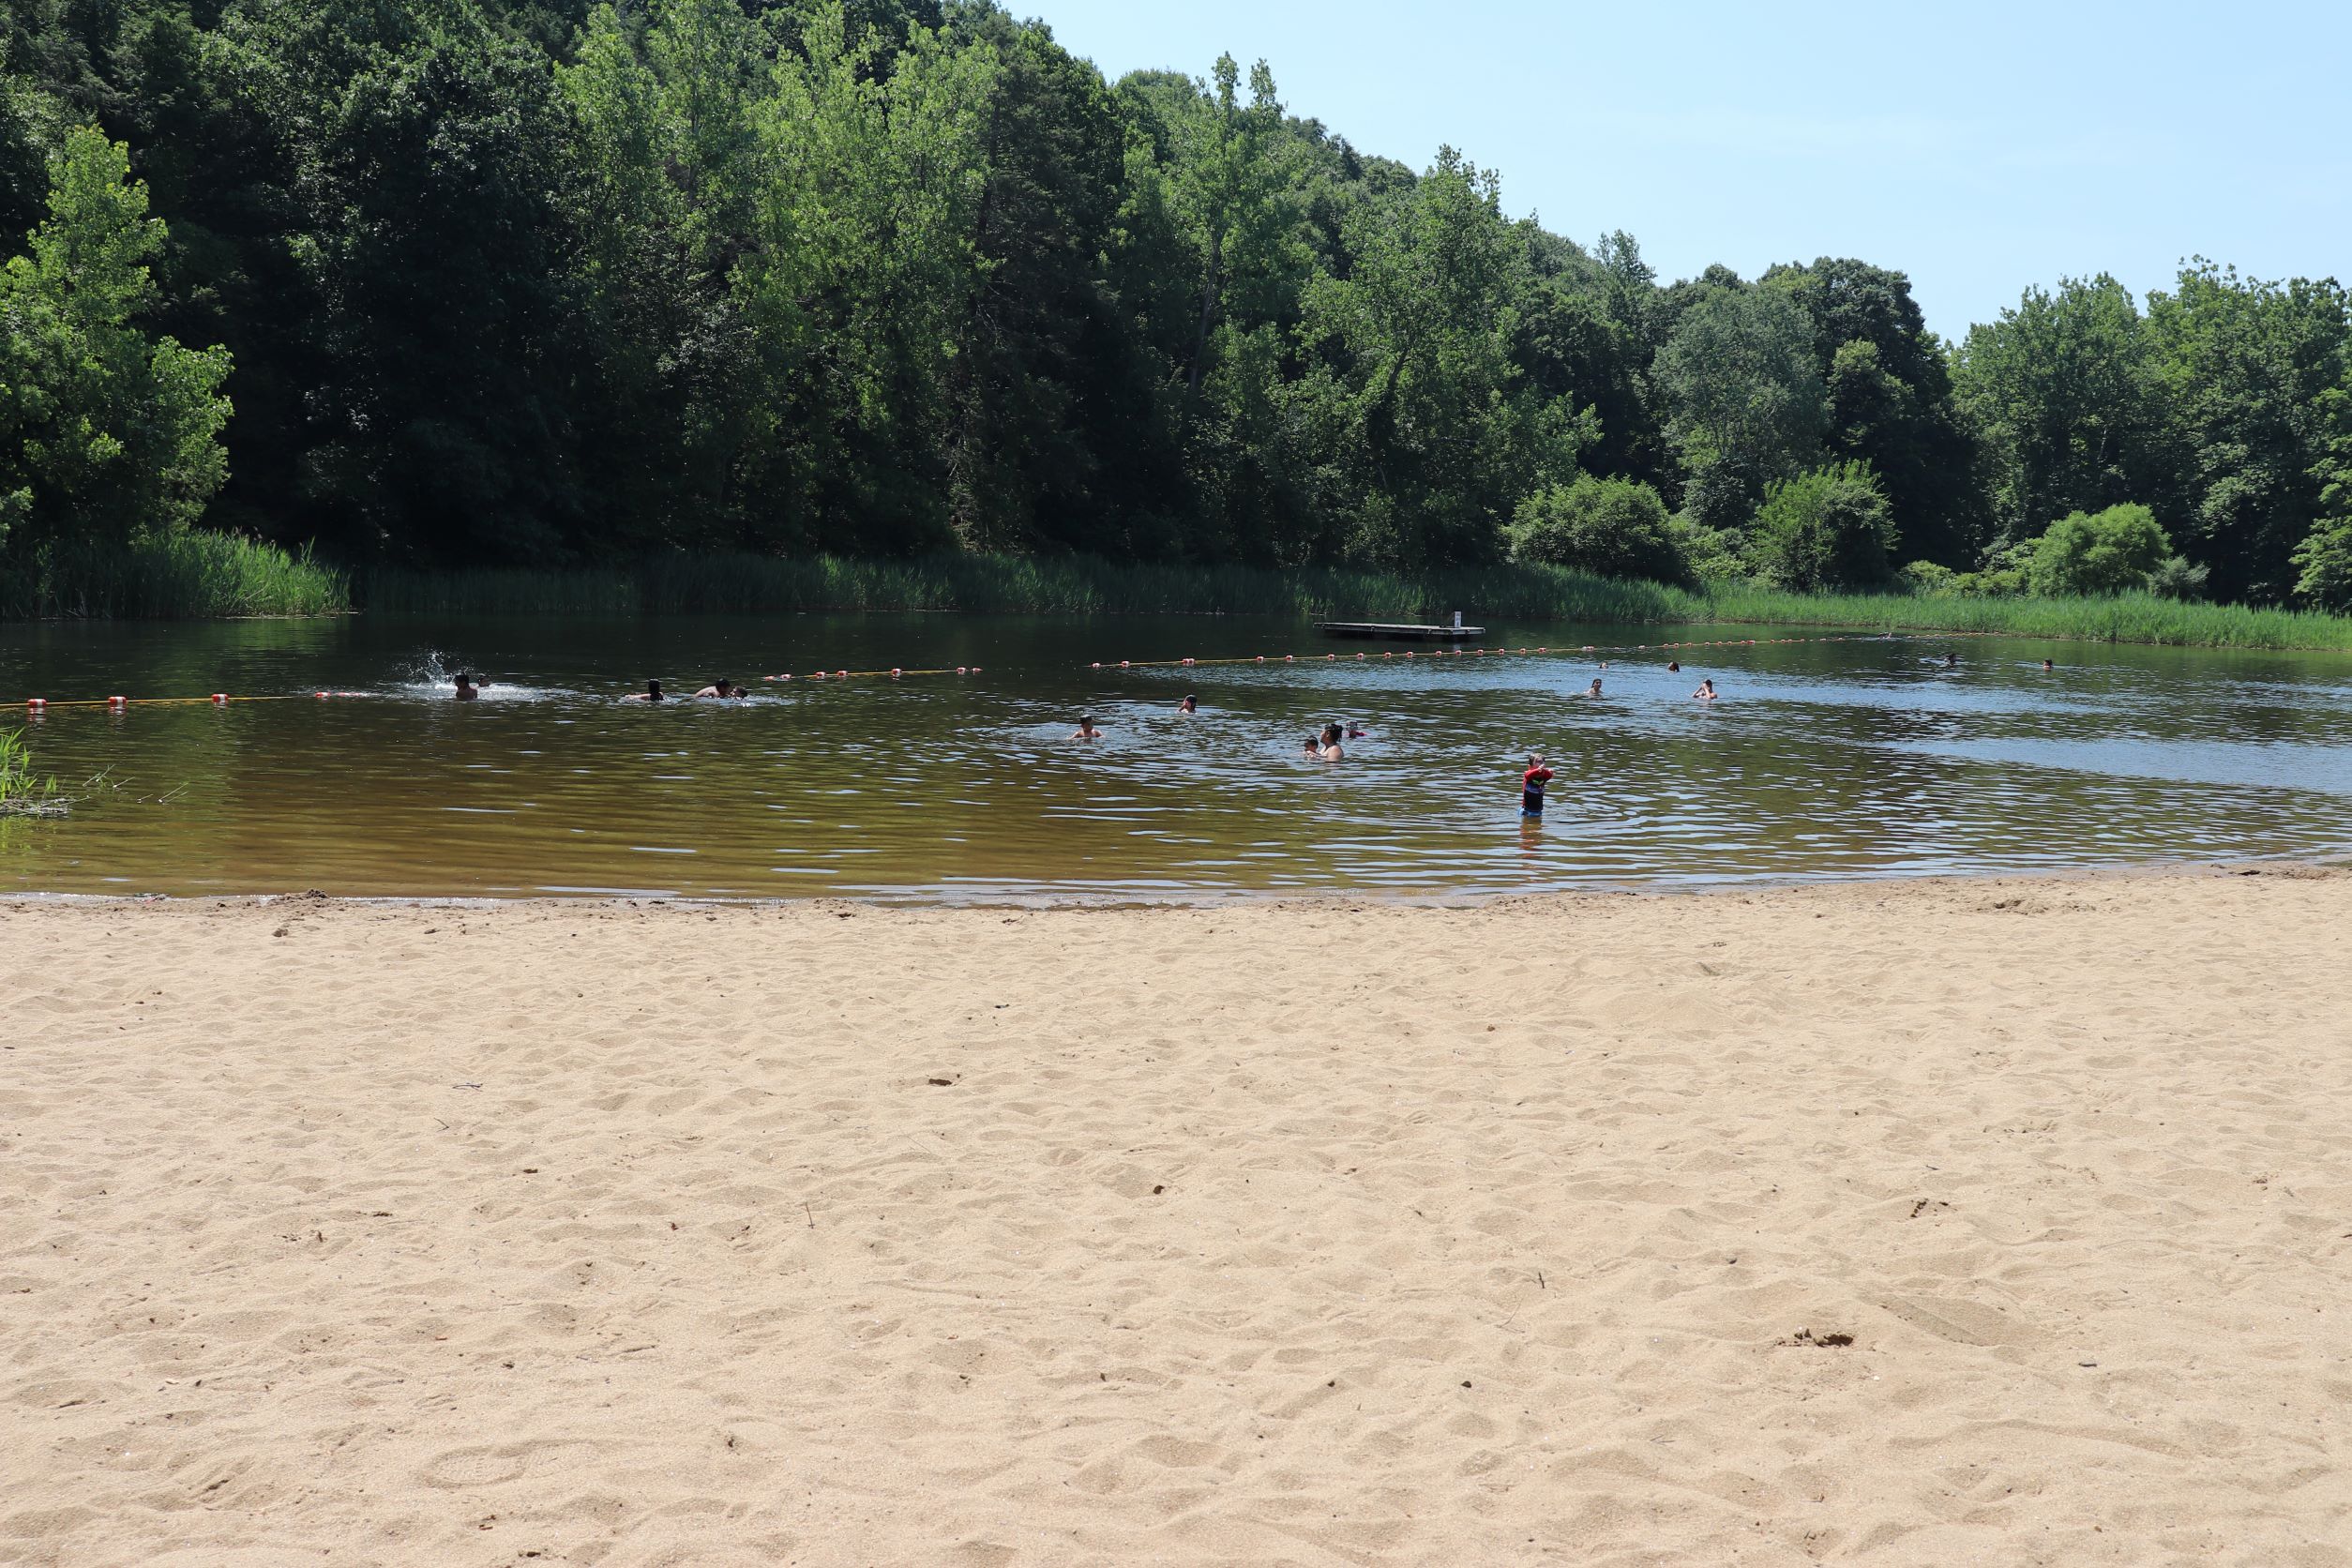 image of kids swimming at beach in wadsworth state park in middletown ct.